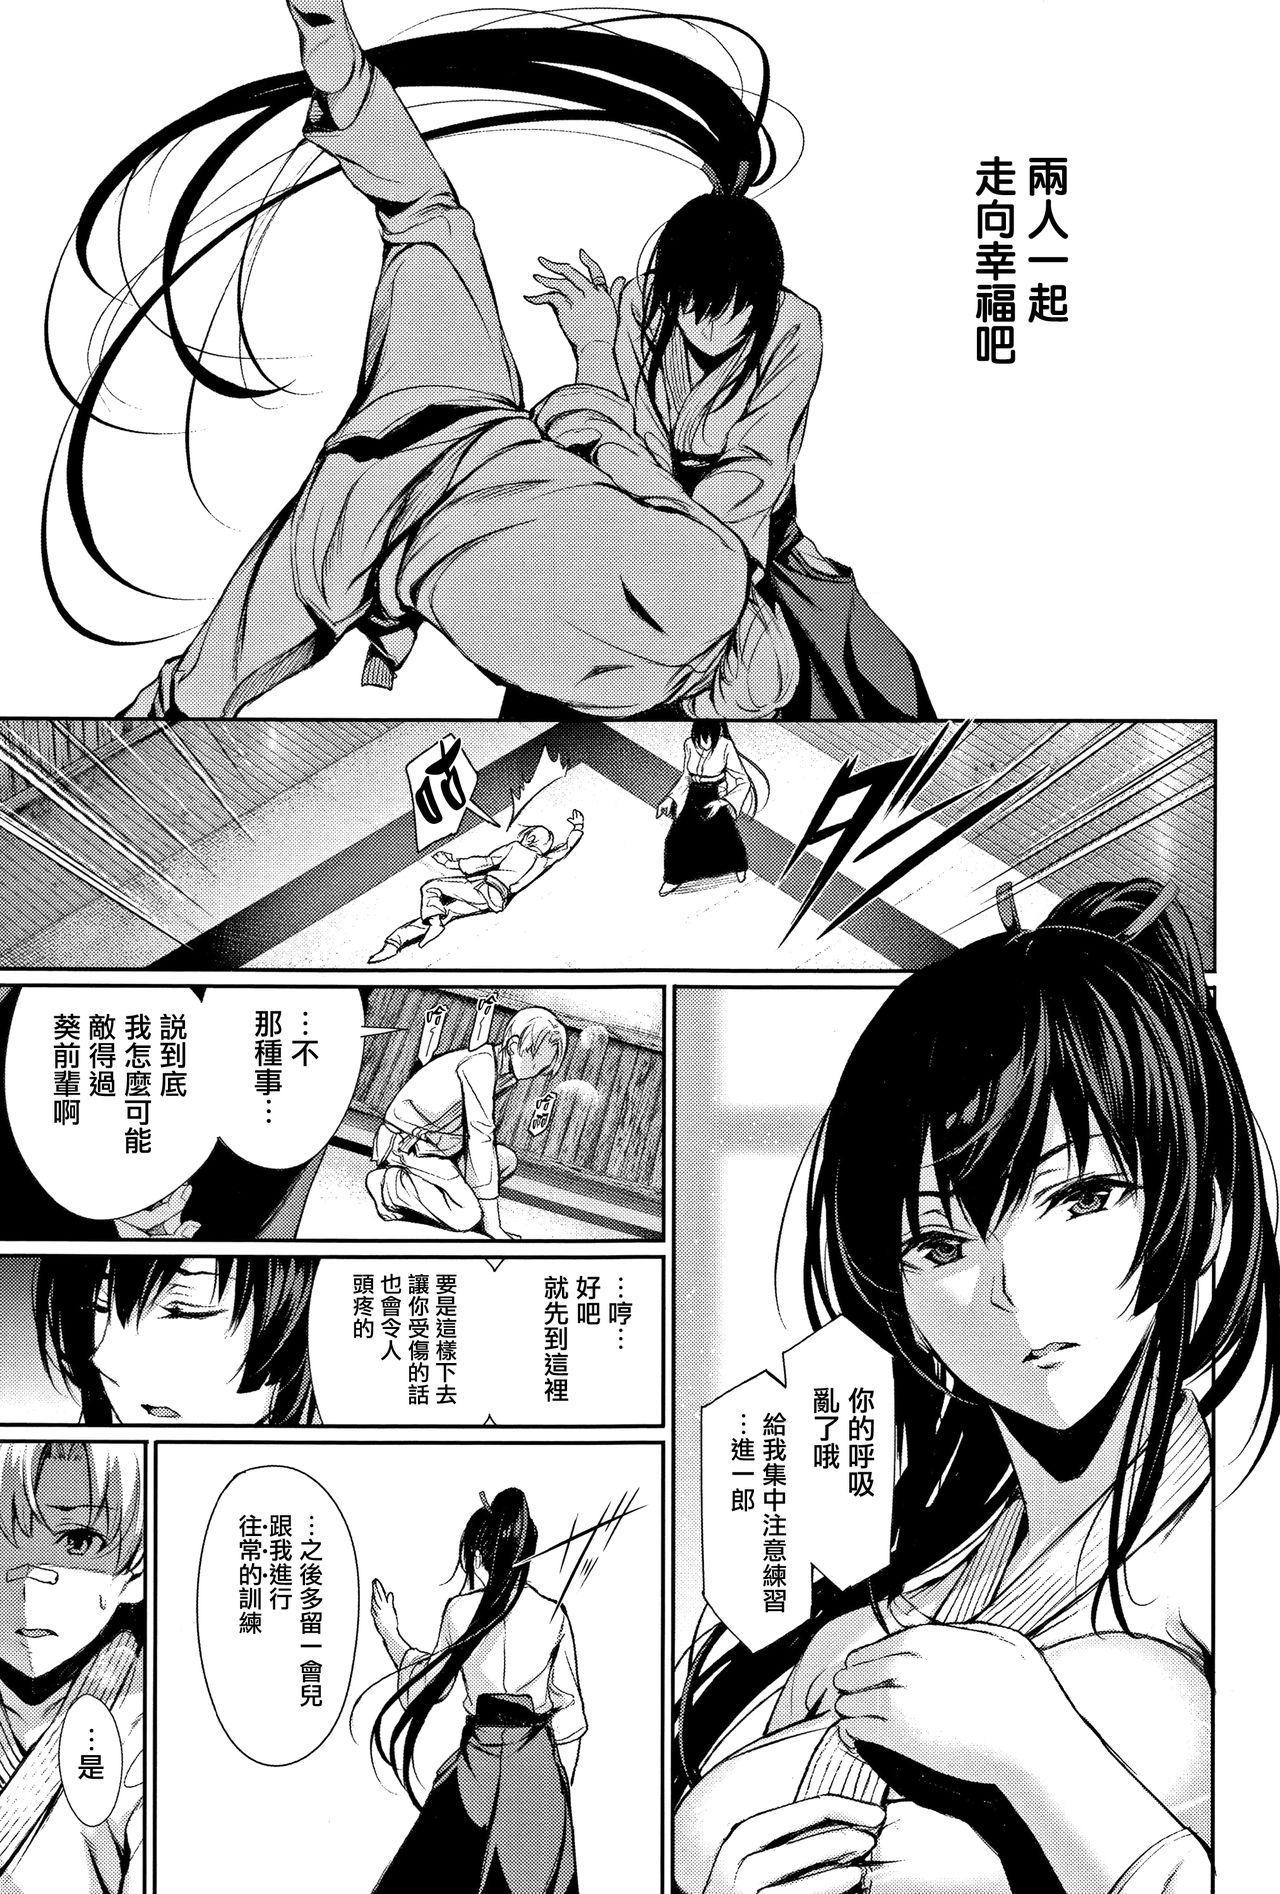 Bisex Kimi Omou Koi - I think of you. Ch. 1 Lady - Page 8